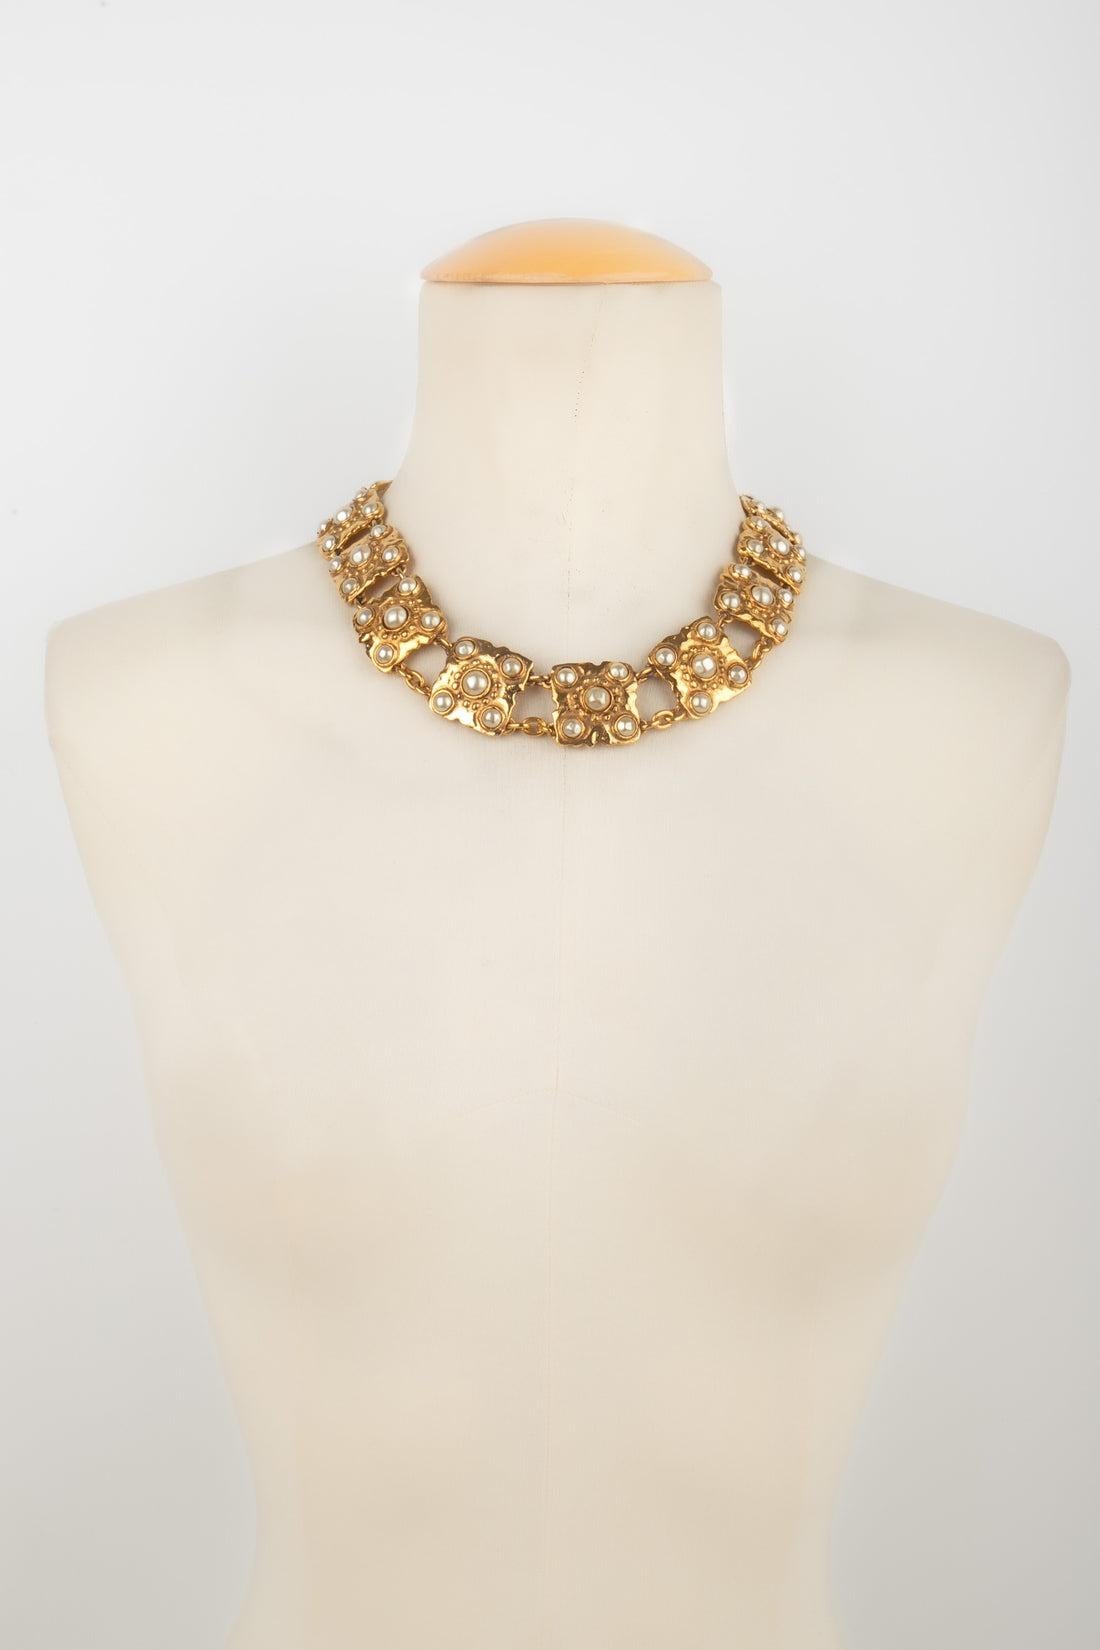 Chanel - (Made in France) Articulated golden metal short necklace ornamented with pearly cabochons. Jewelry from the middle of the 1980s.  - Gravé du S de solde.

Additional information:
Condition: Very good condition
Dimensions: Length: from 39 cm